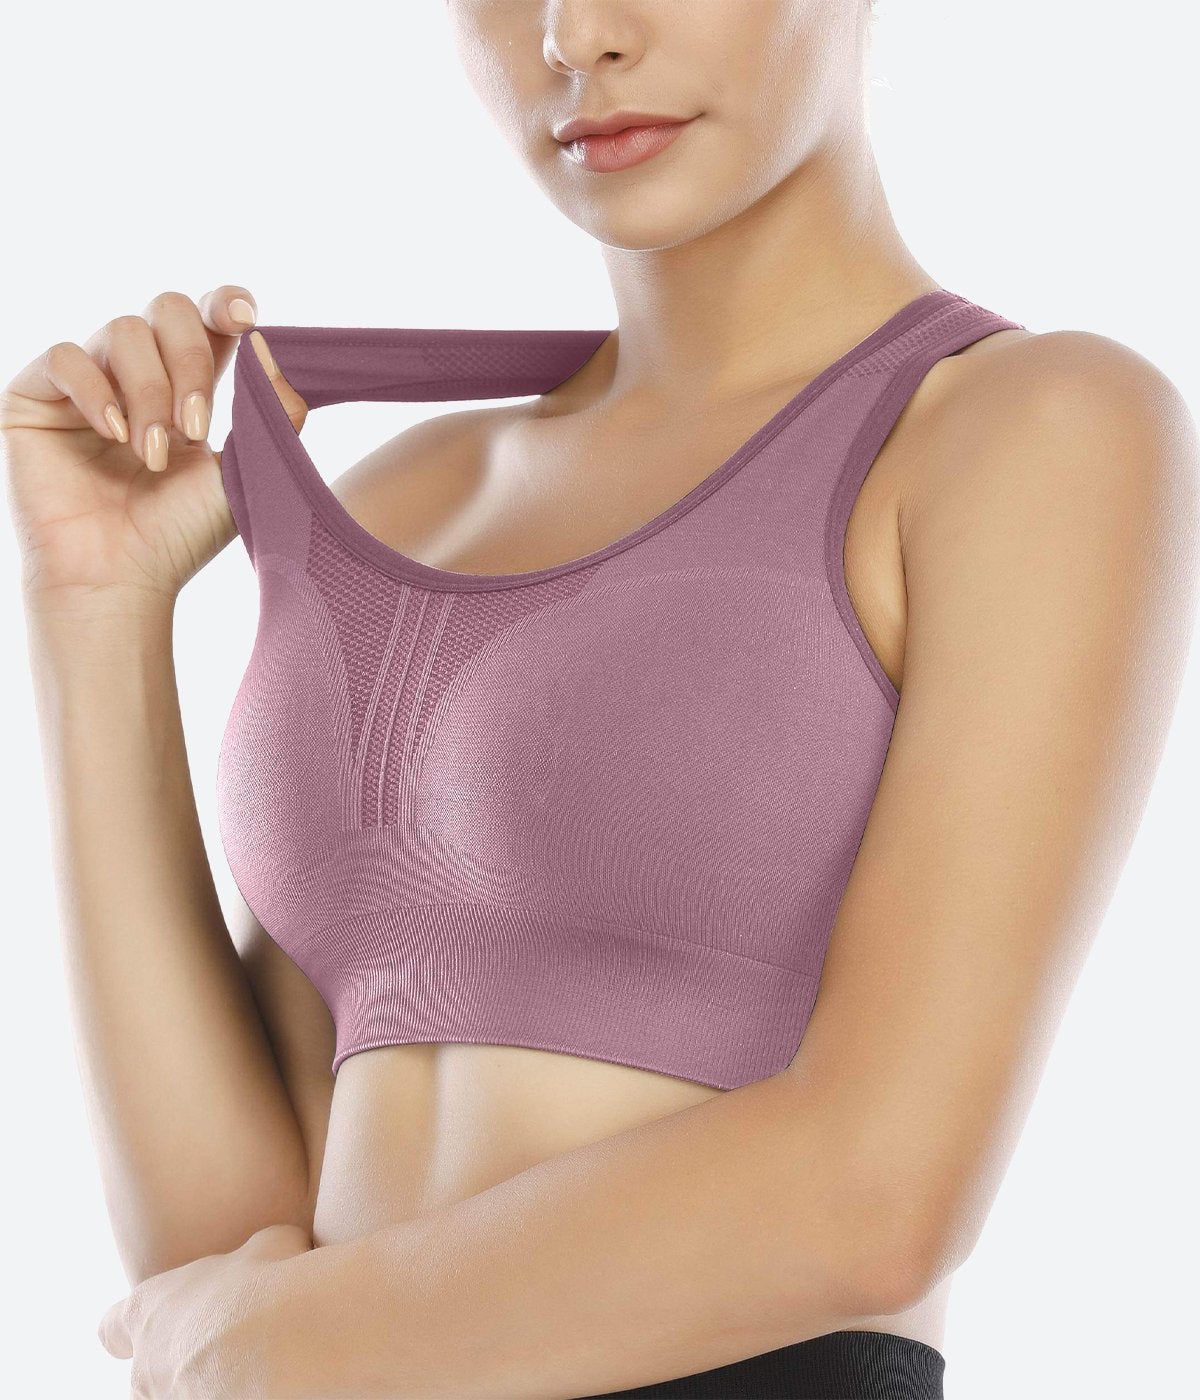 Yogalicious Sports Bra Gray Size M - $11 (35% Off Retail) - From Brianna